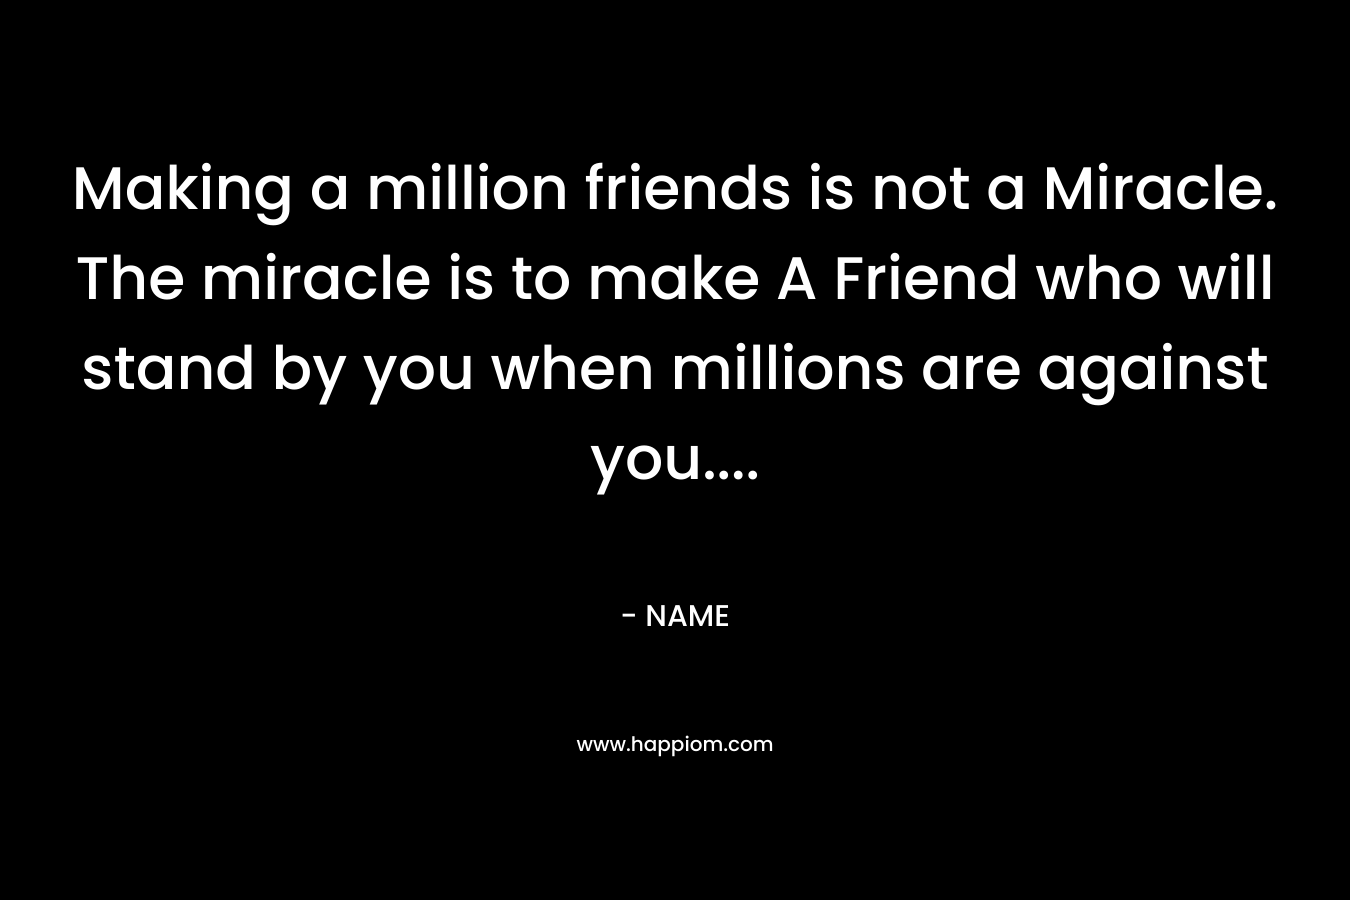 Making a million friends is not a Miracle. The miracle is to make A Friend who will stand by you when millions are against you....